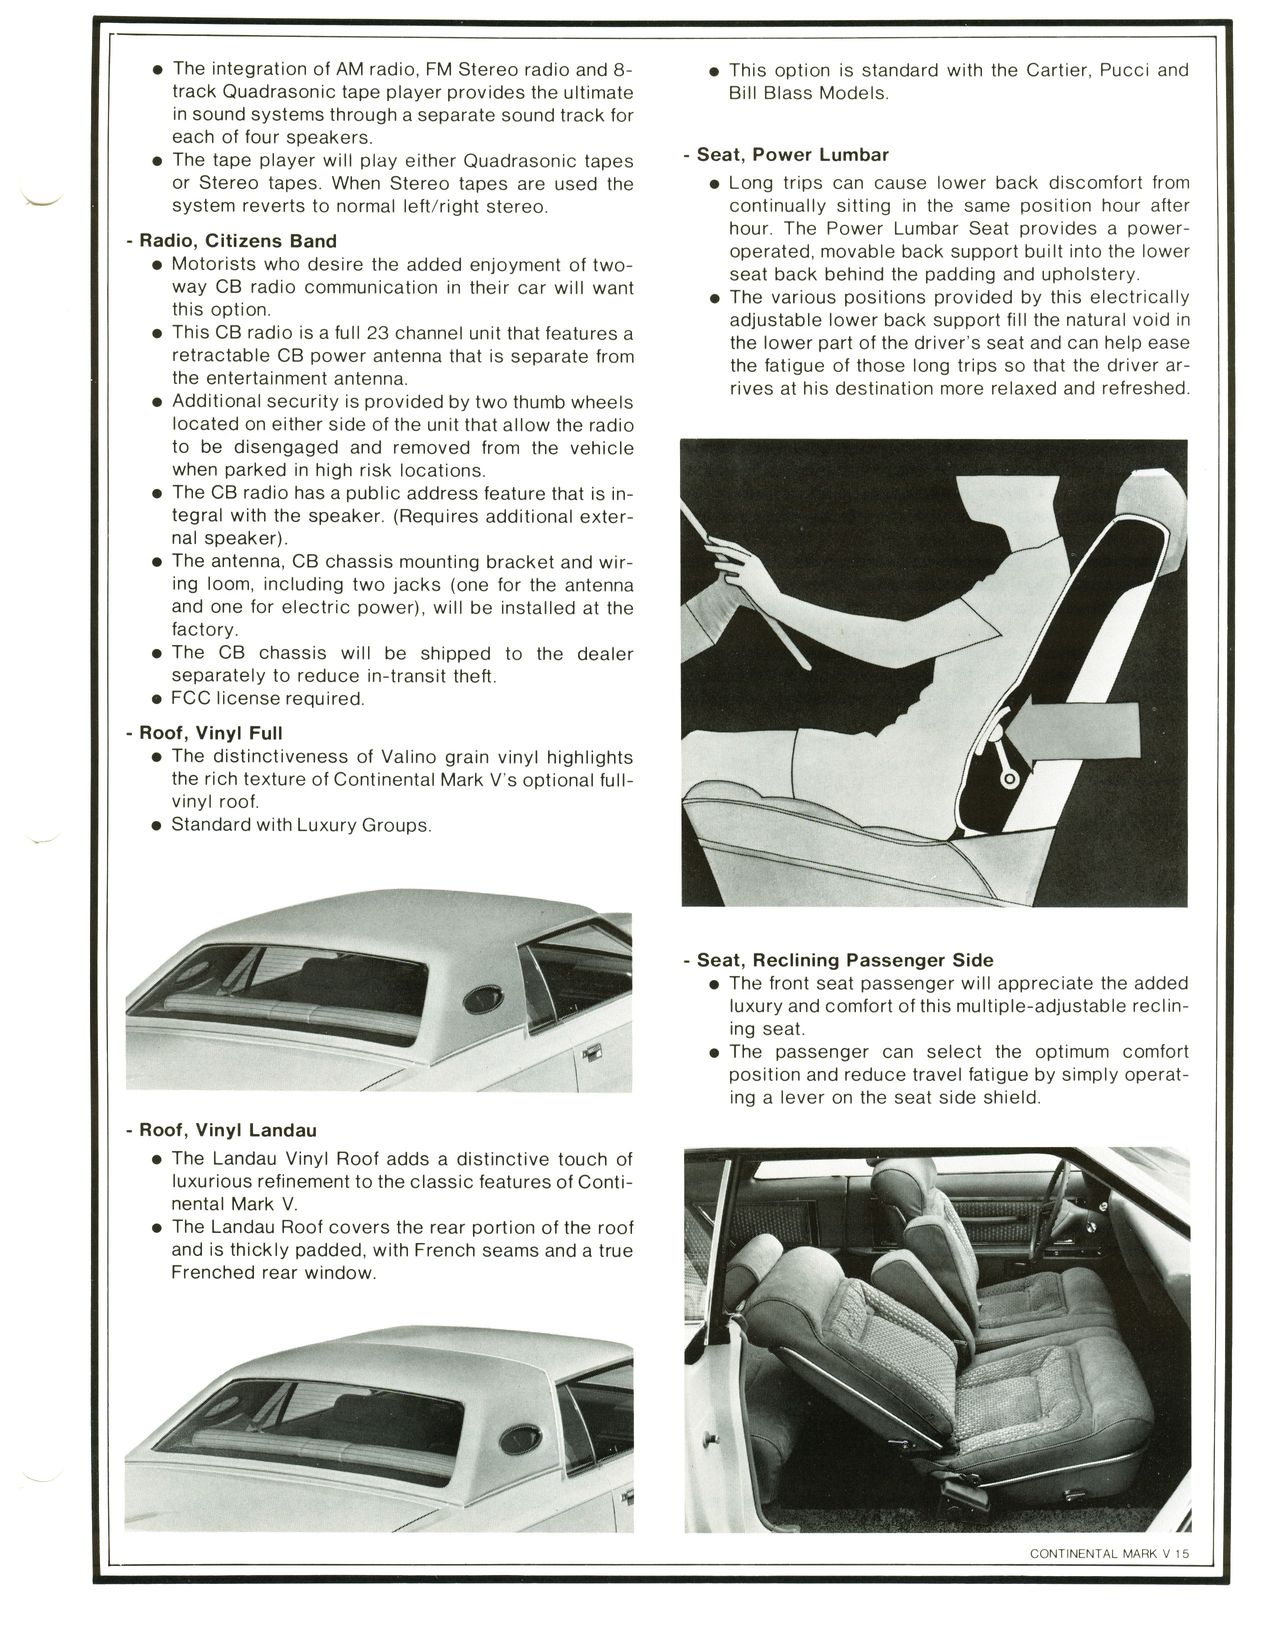 1977_Continental_Product_Facts_Book-1-15